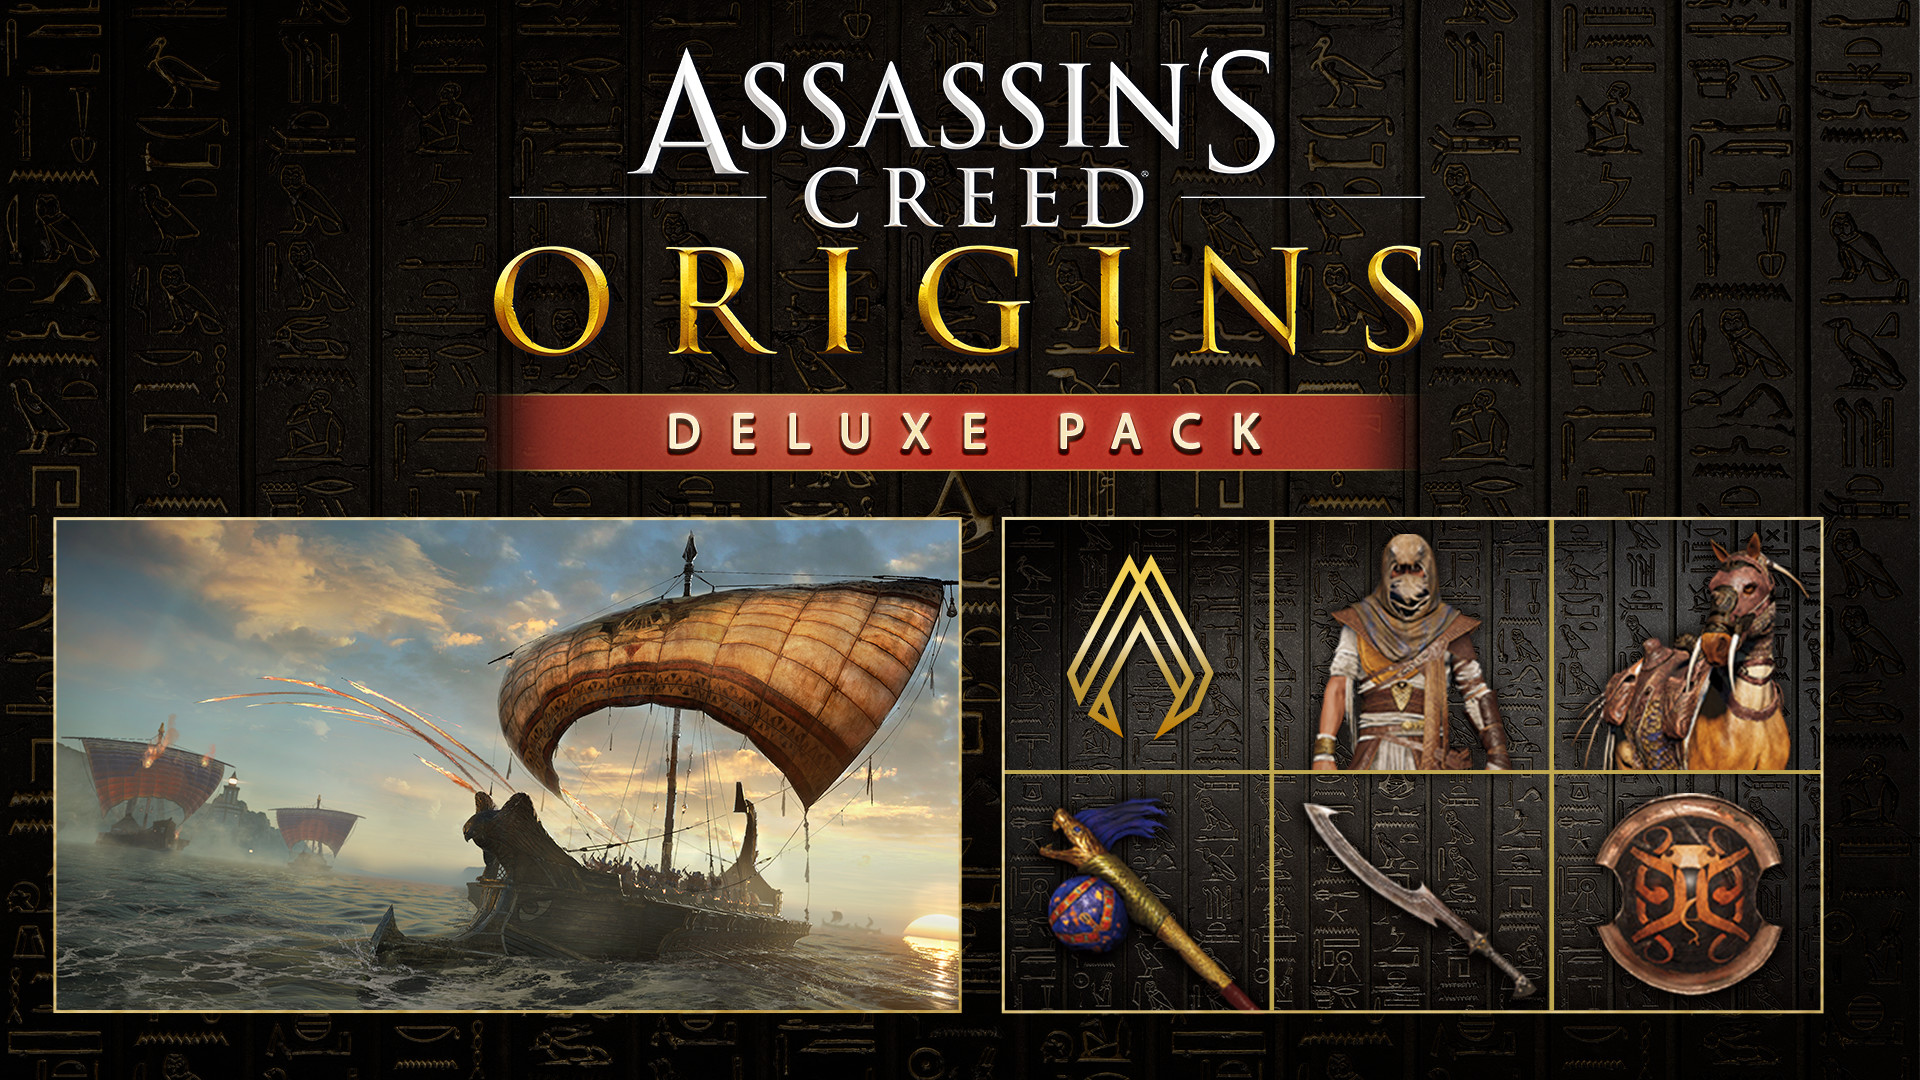 Assassin's Creed® Origins - Deluxe Pack Images 